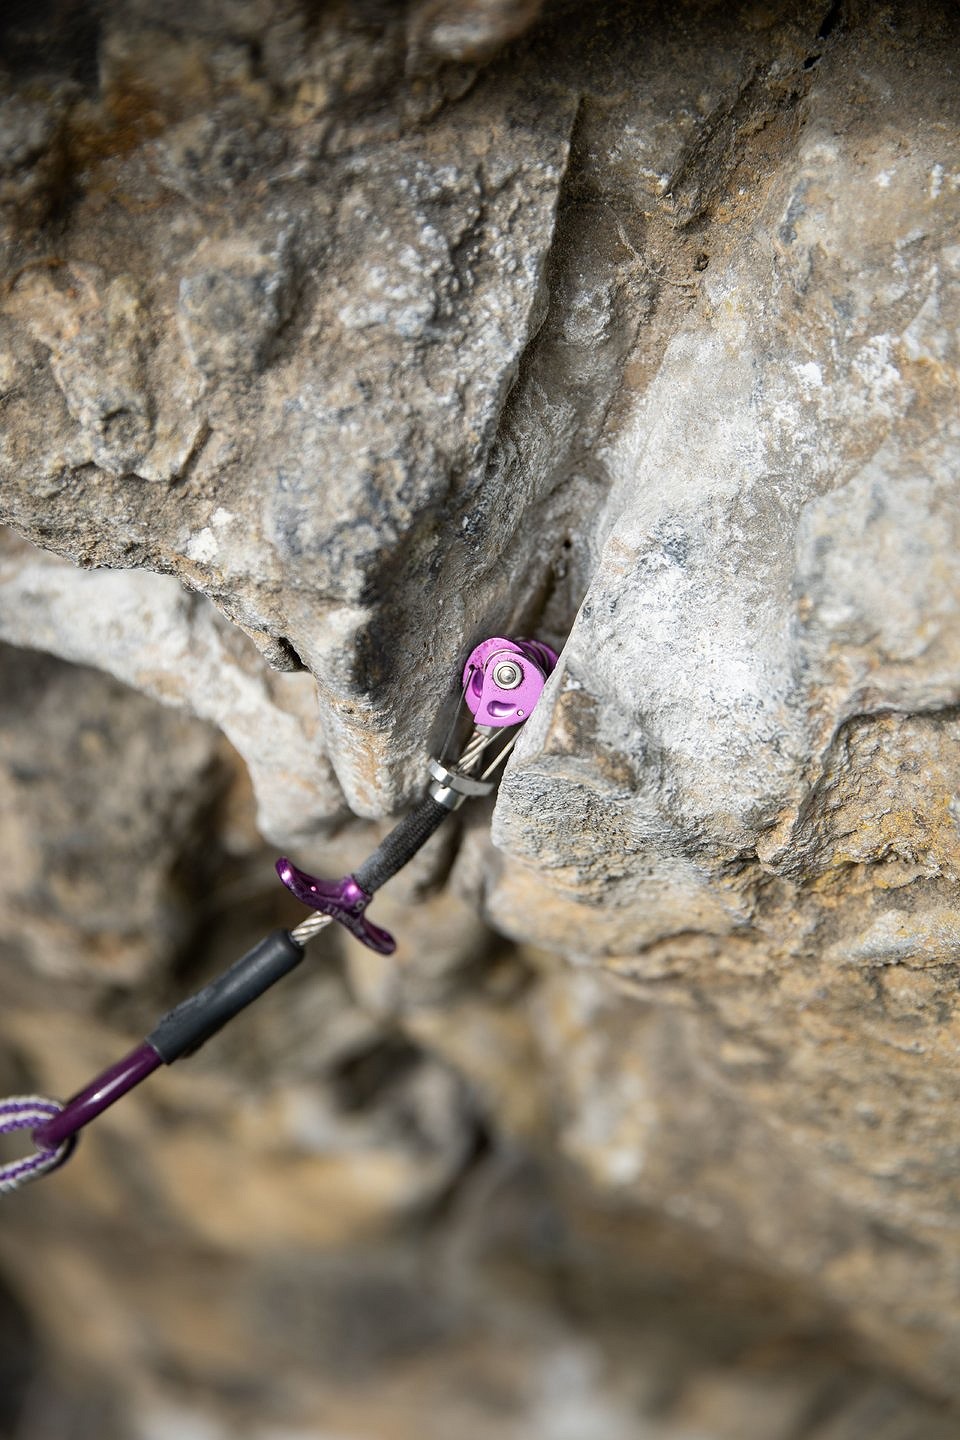 The ultimate test for a cam: polished Stoney limestone  © UKC Gear